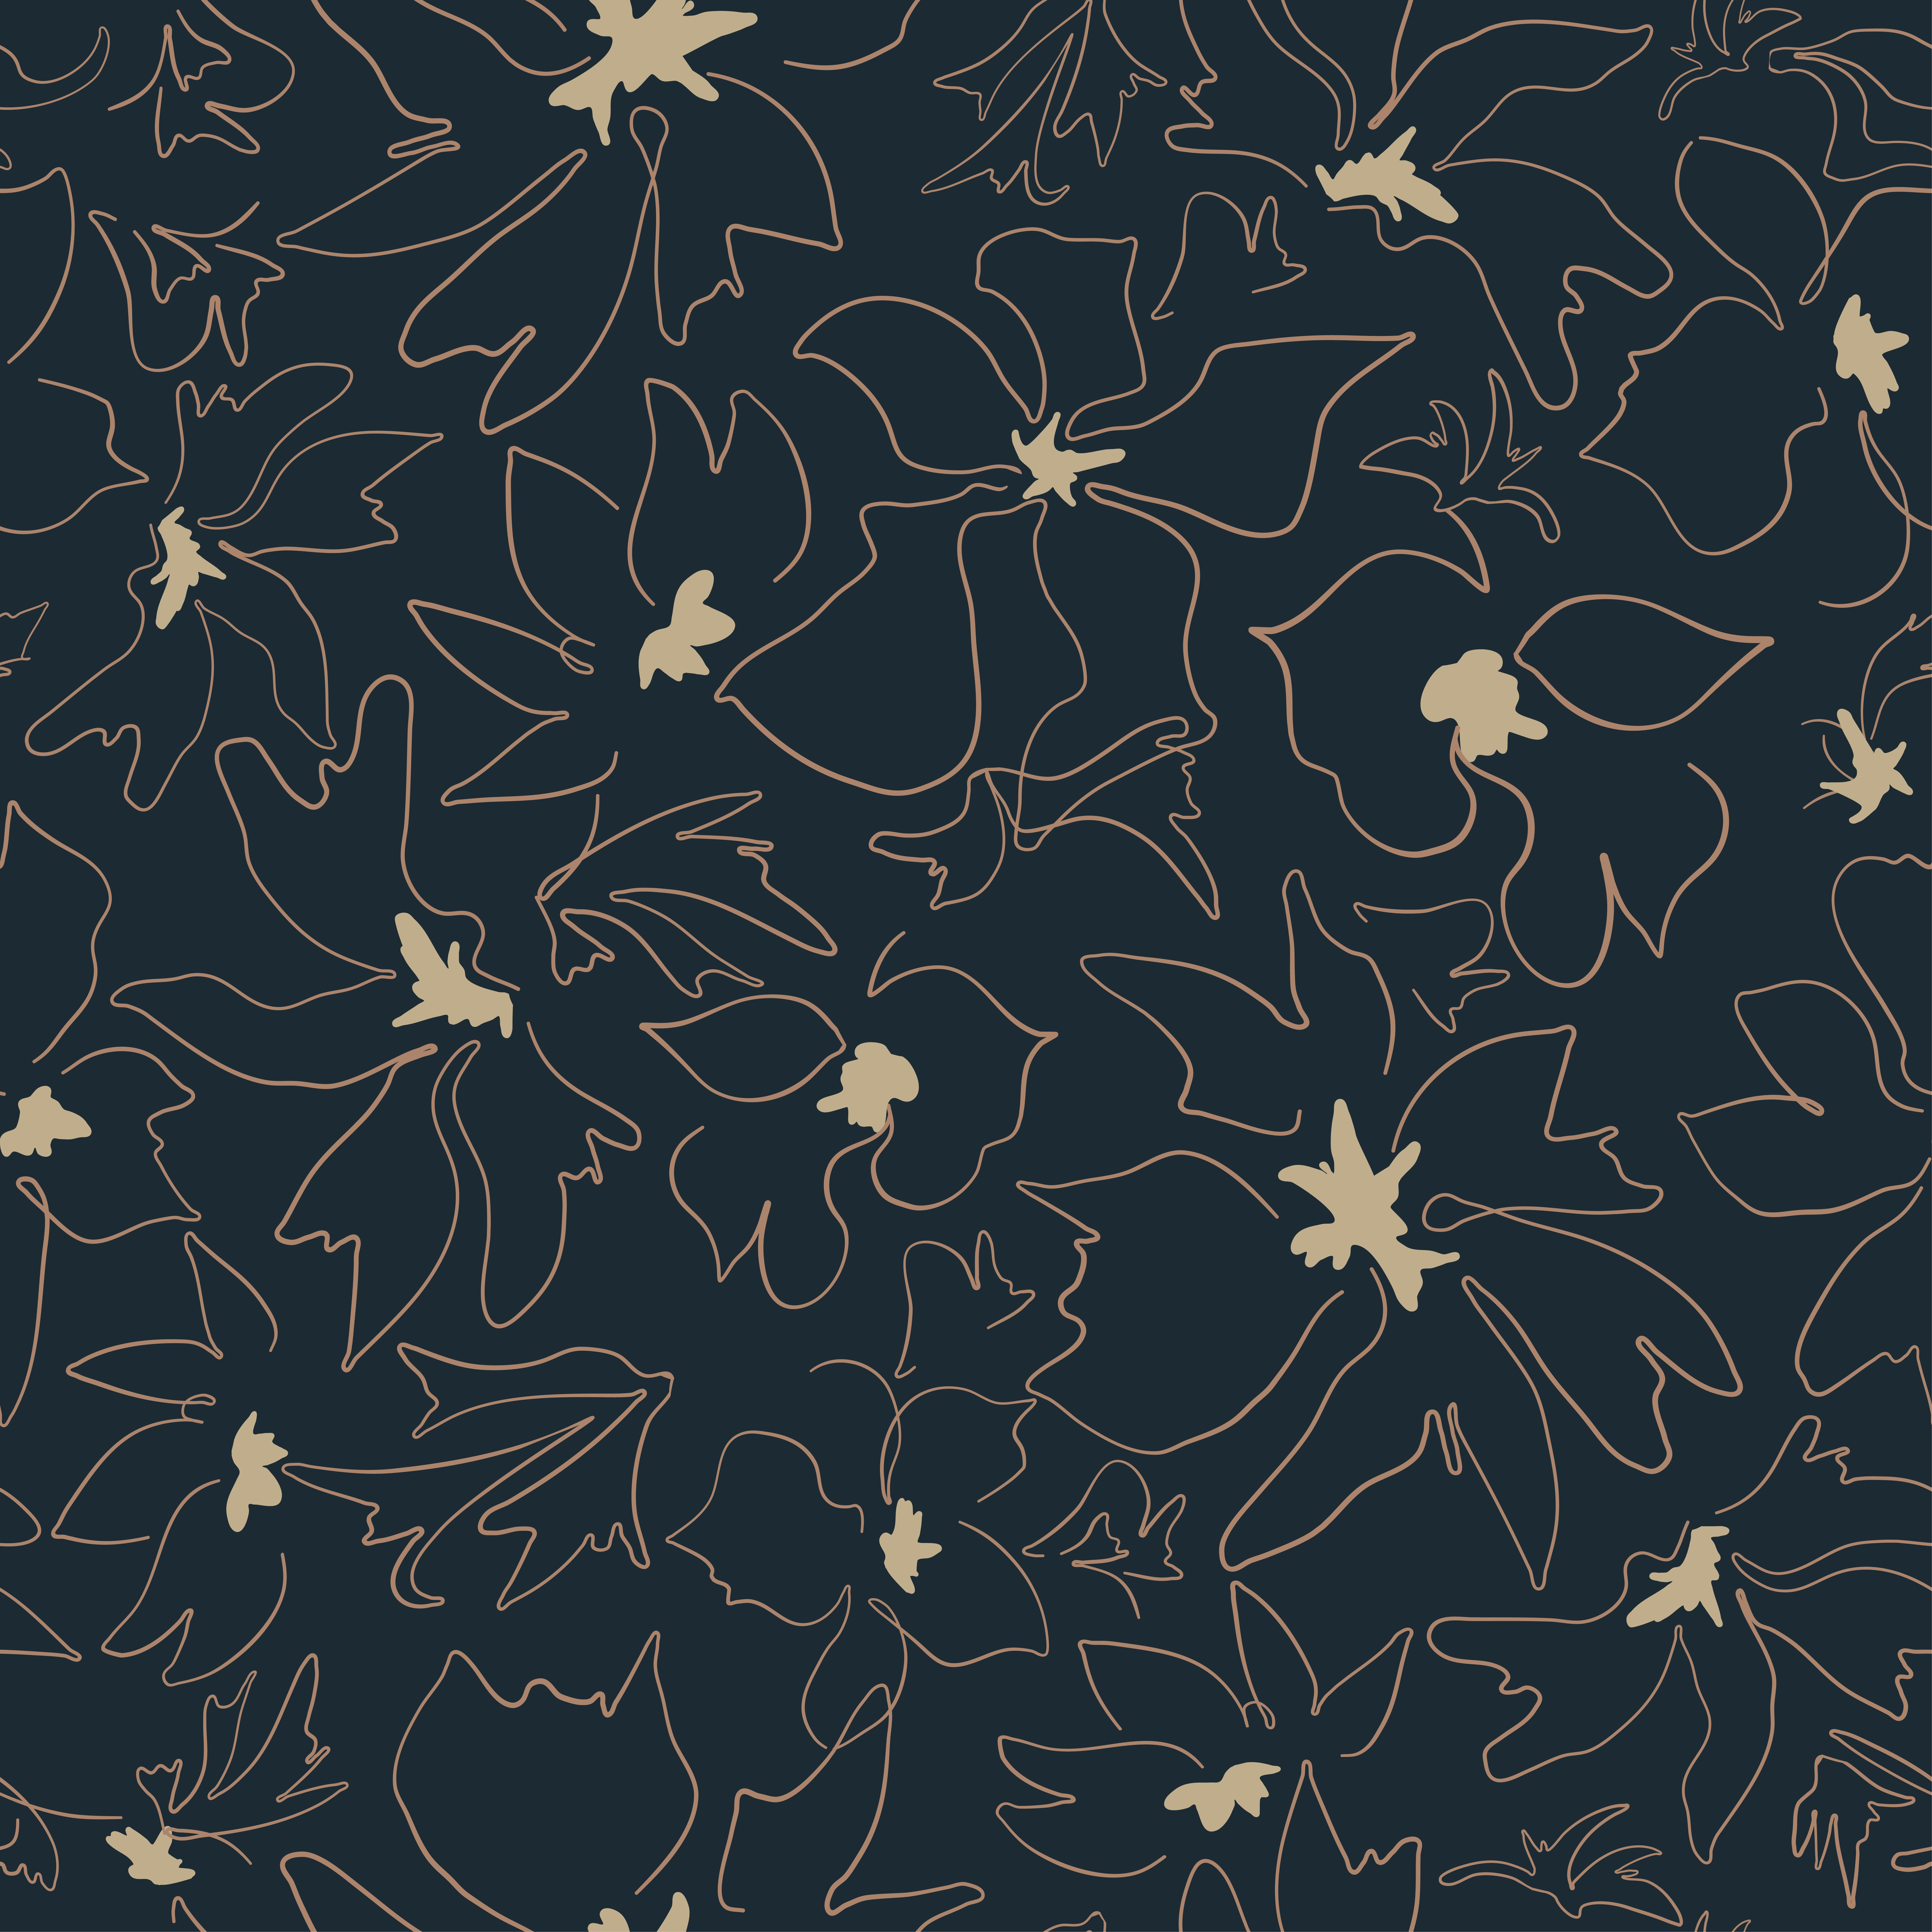 Seamless floral natural abstract pattern millefleurs style flowers and leaves botanical hand drawn